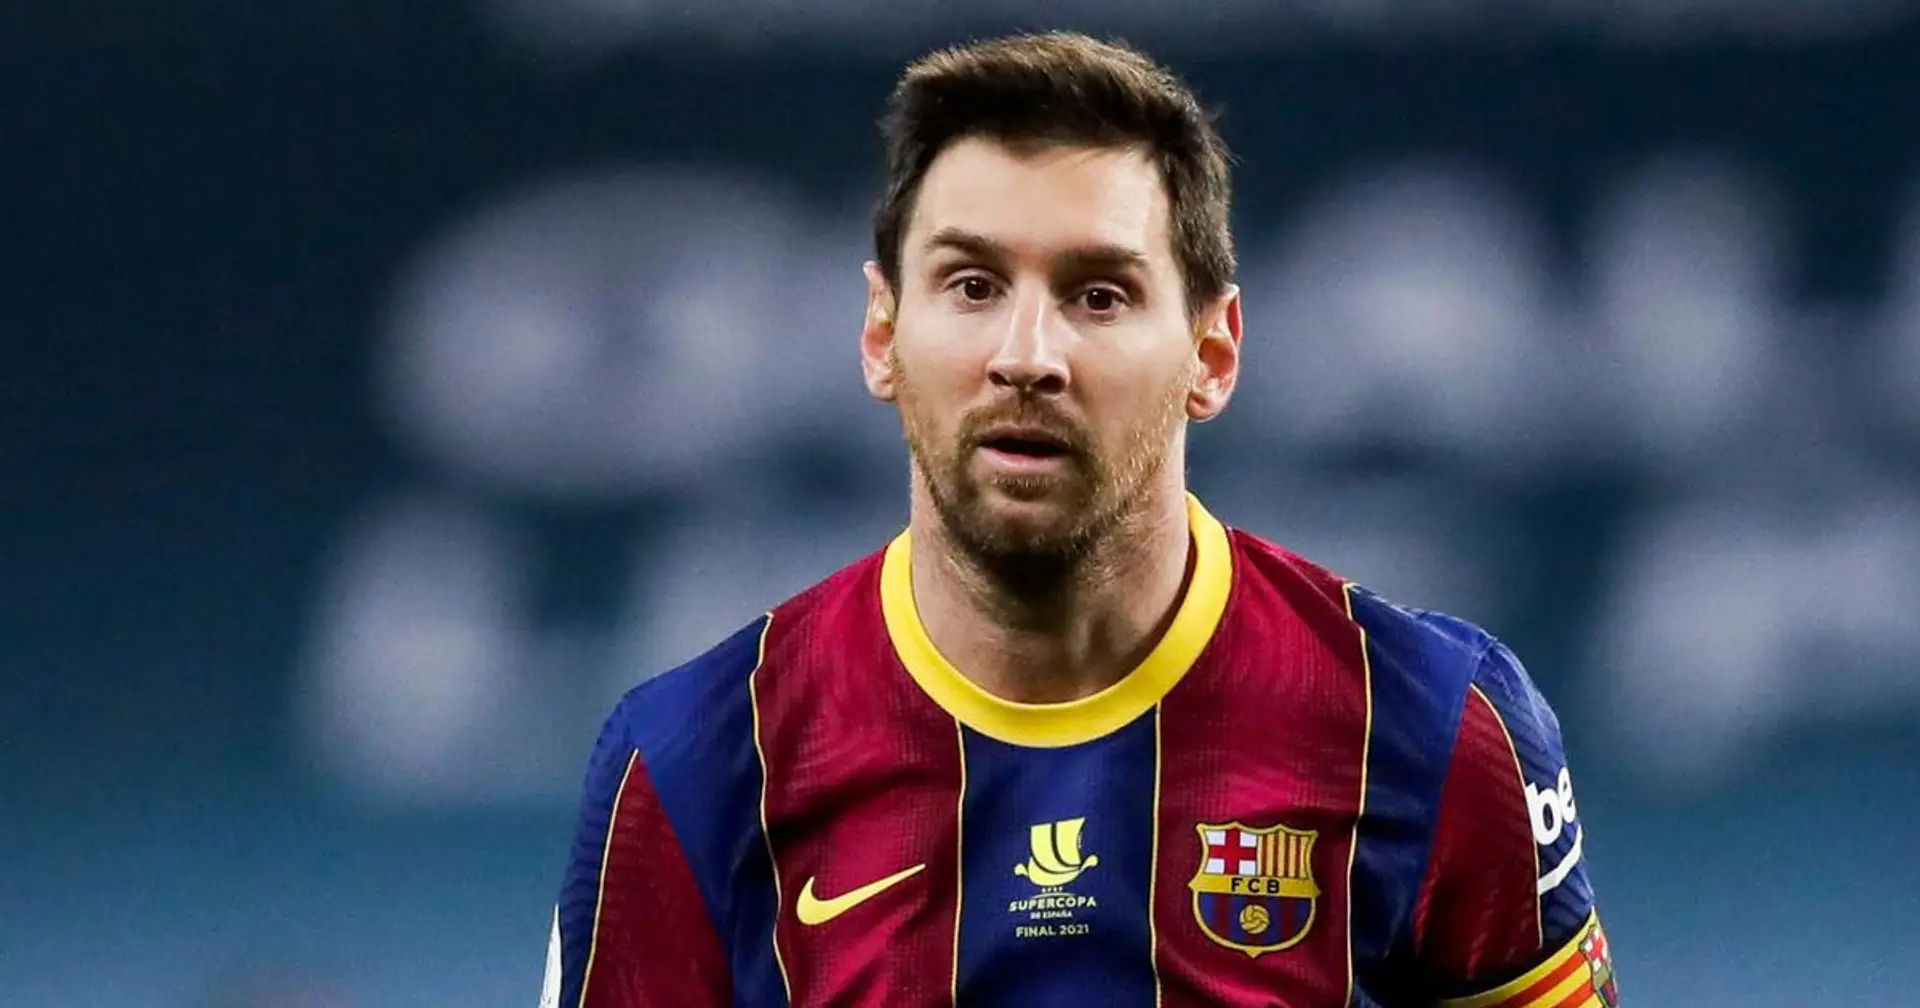 Revealed: Where Leo Messi stands among stat leaders in 2020/21 La Liga